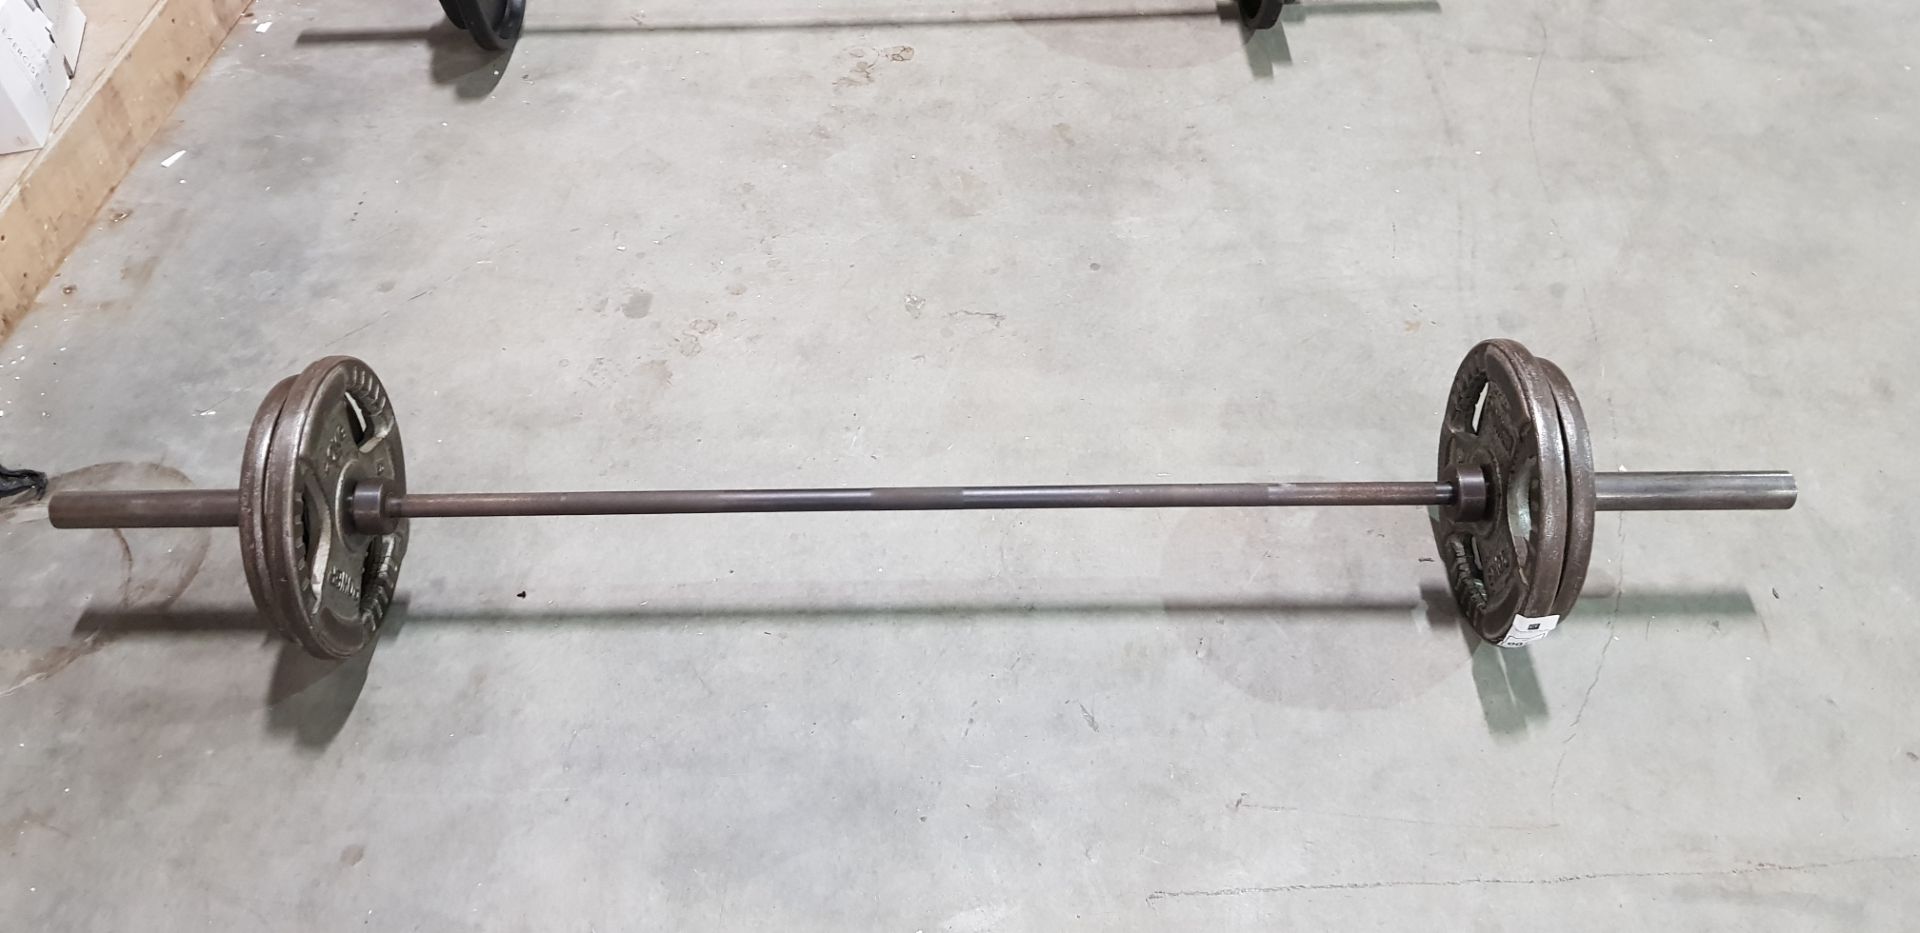 1 X OLYMPIC 20 KG BARBELL - WITH BODY POWER IRON WEIGHT PLATES - INCLUDES QUICK RELEASE CLIPS 2 X 20